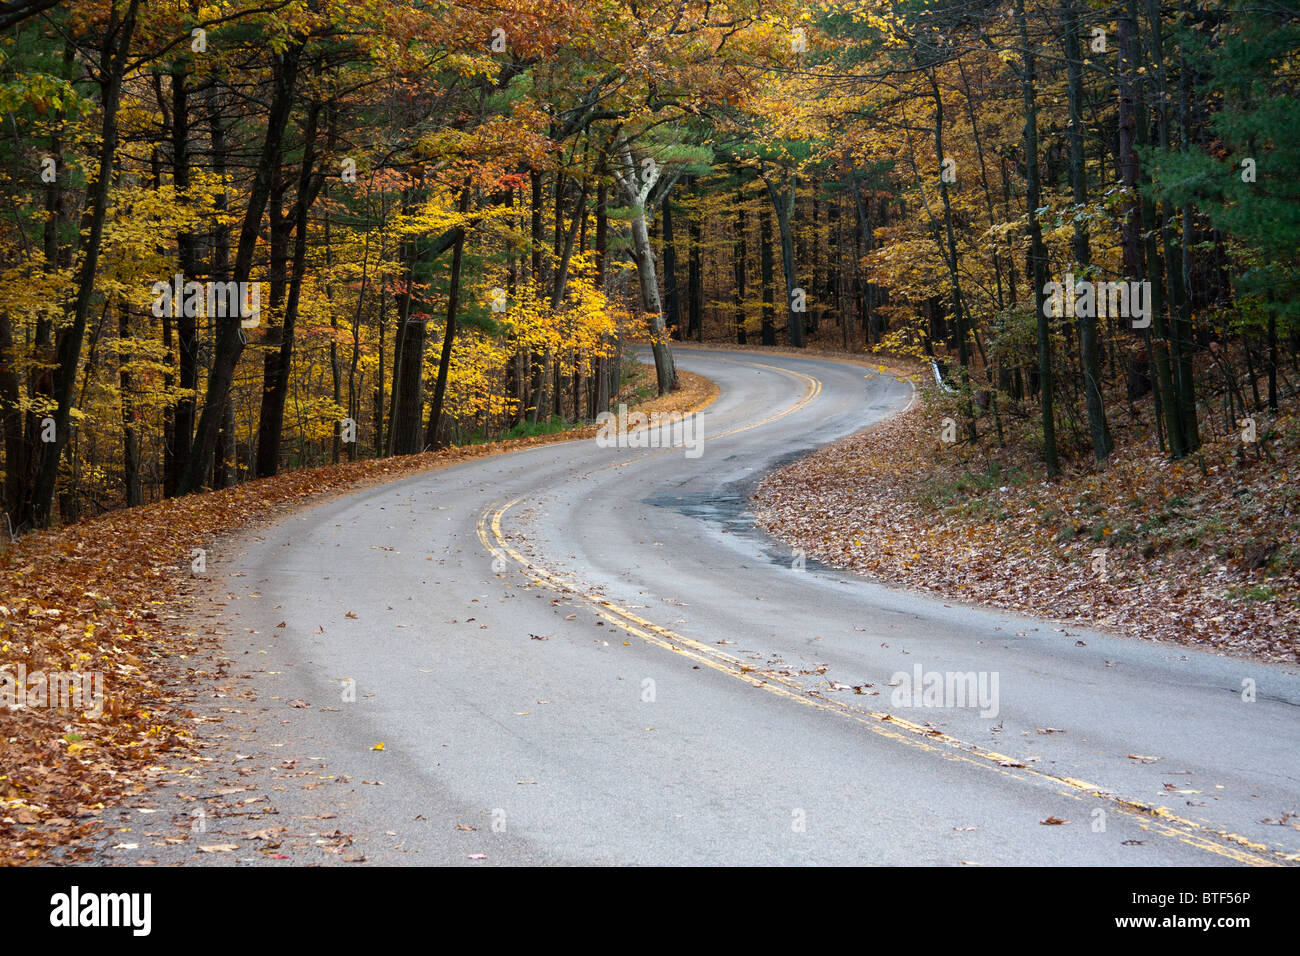 New England in the fall Stock Photo